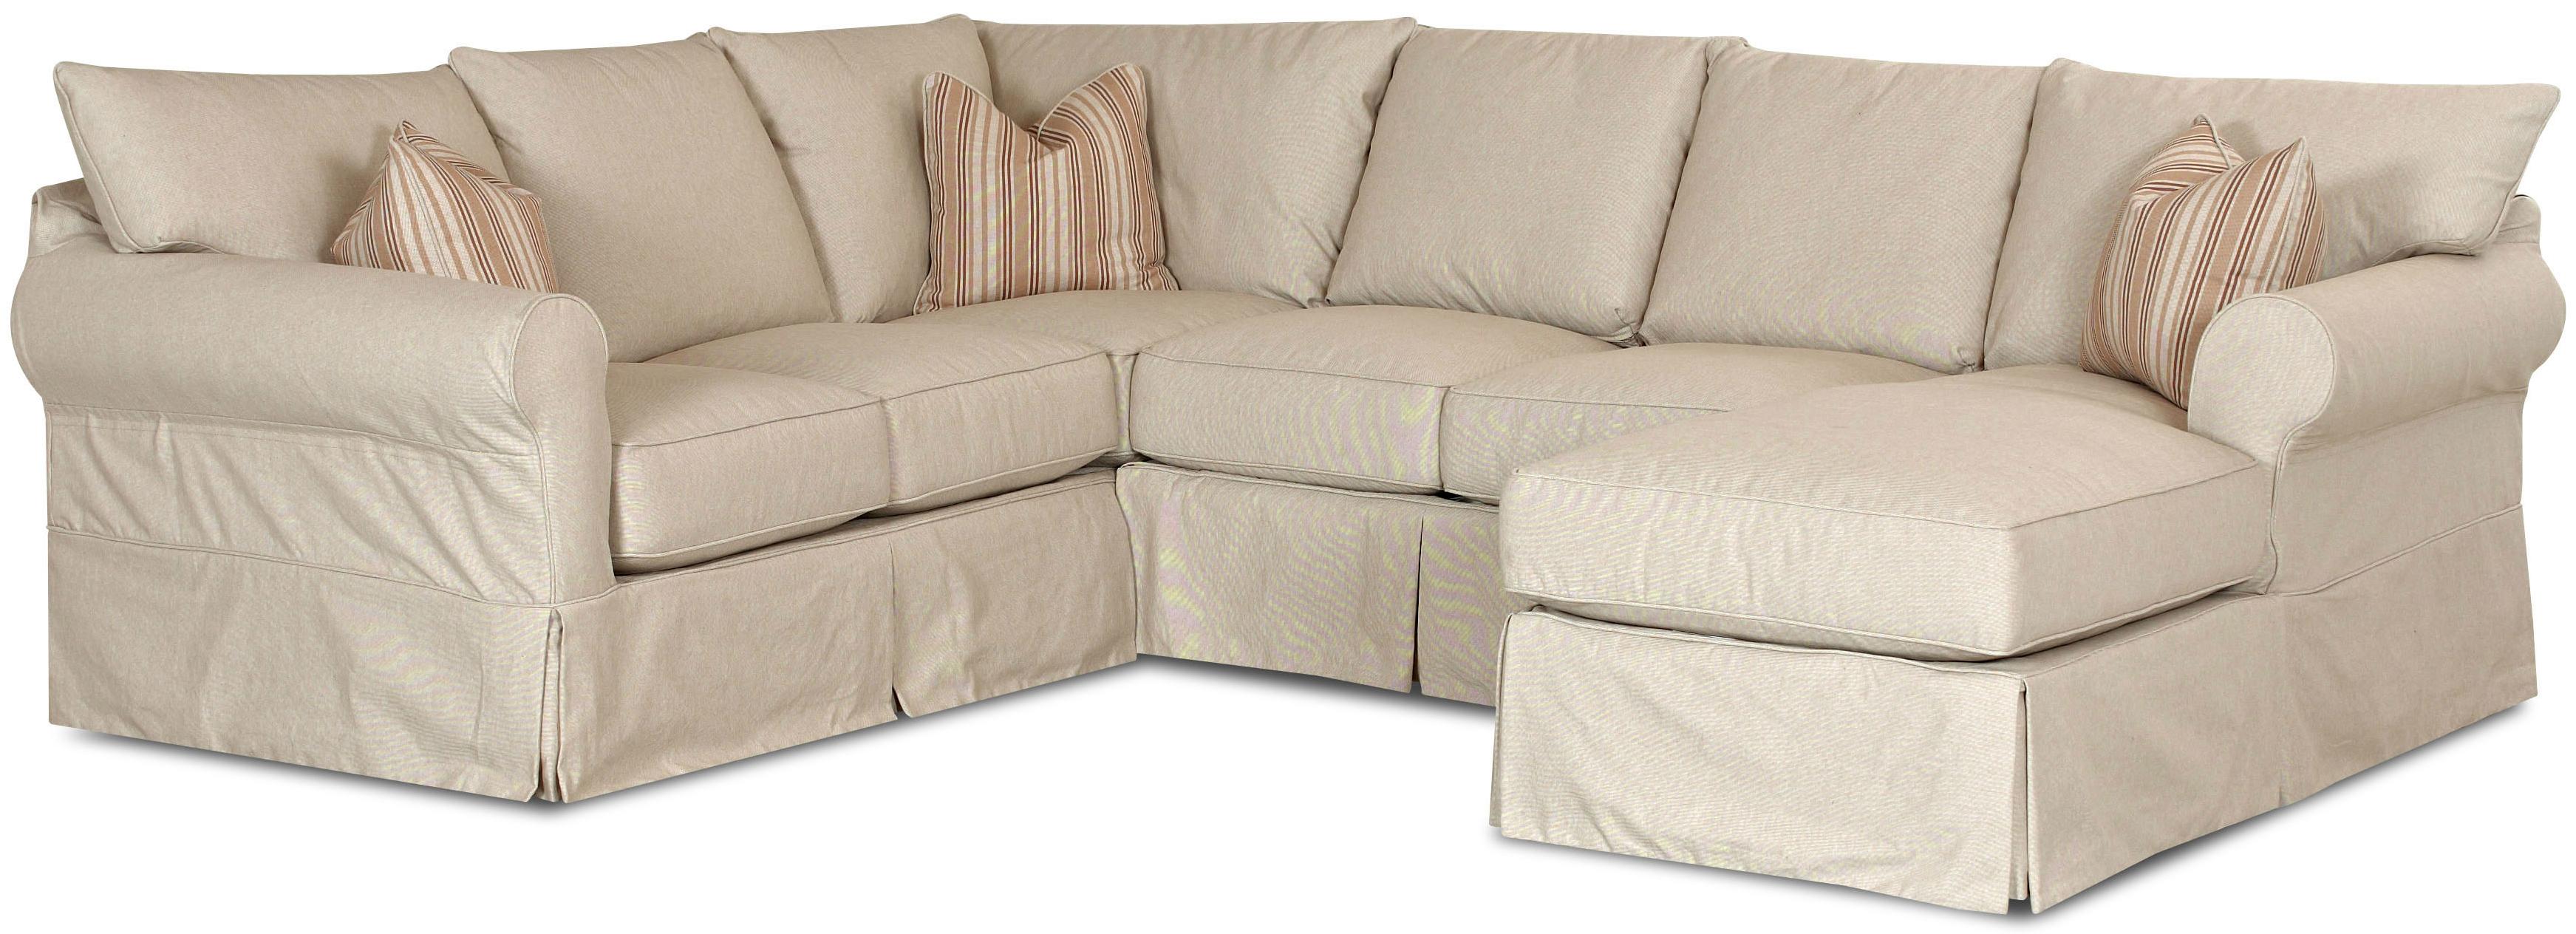 sectional couch covers klaussner jenny sectional - item number: d16100l crns+als+r chase QWPRECV